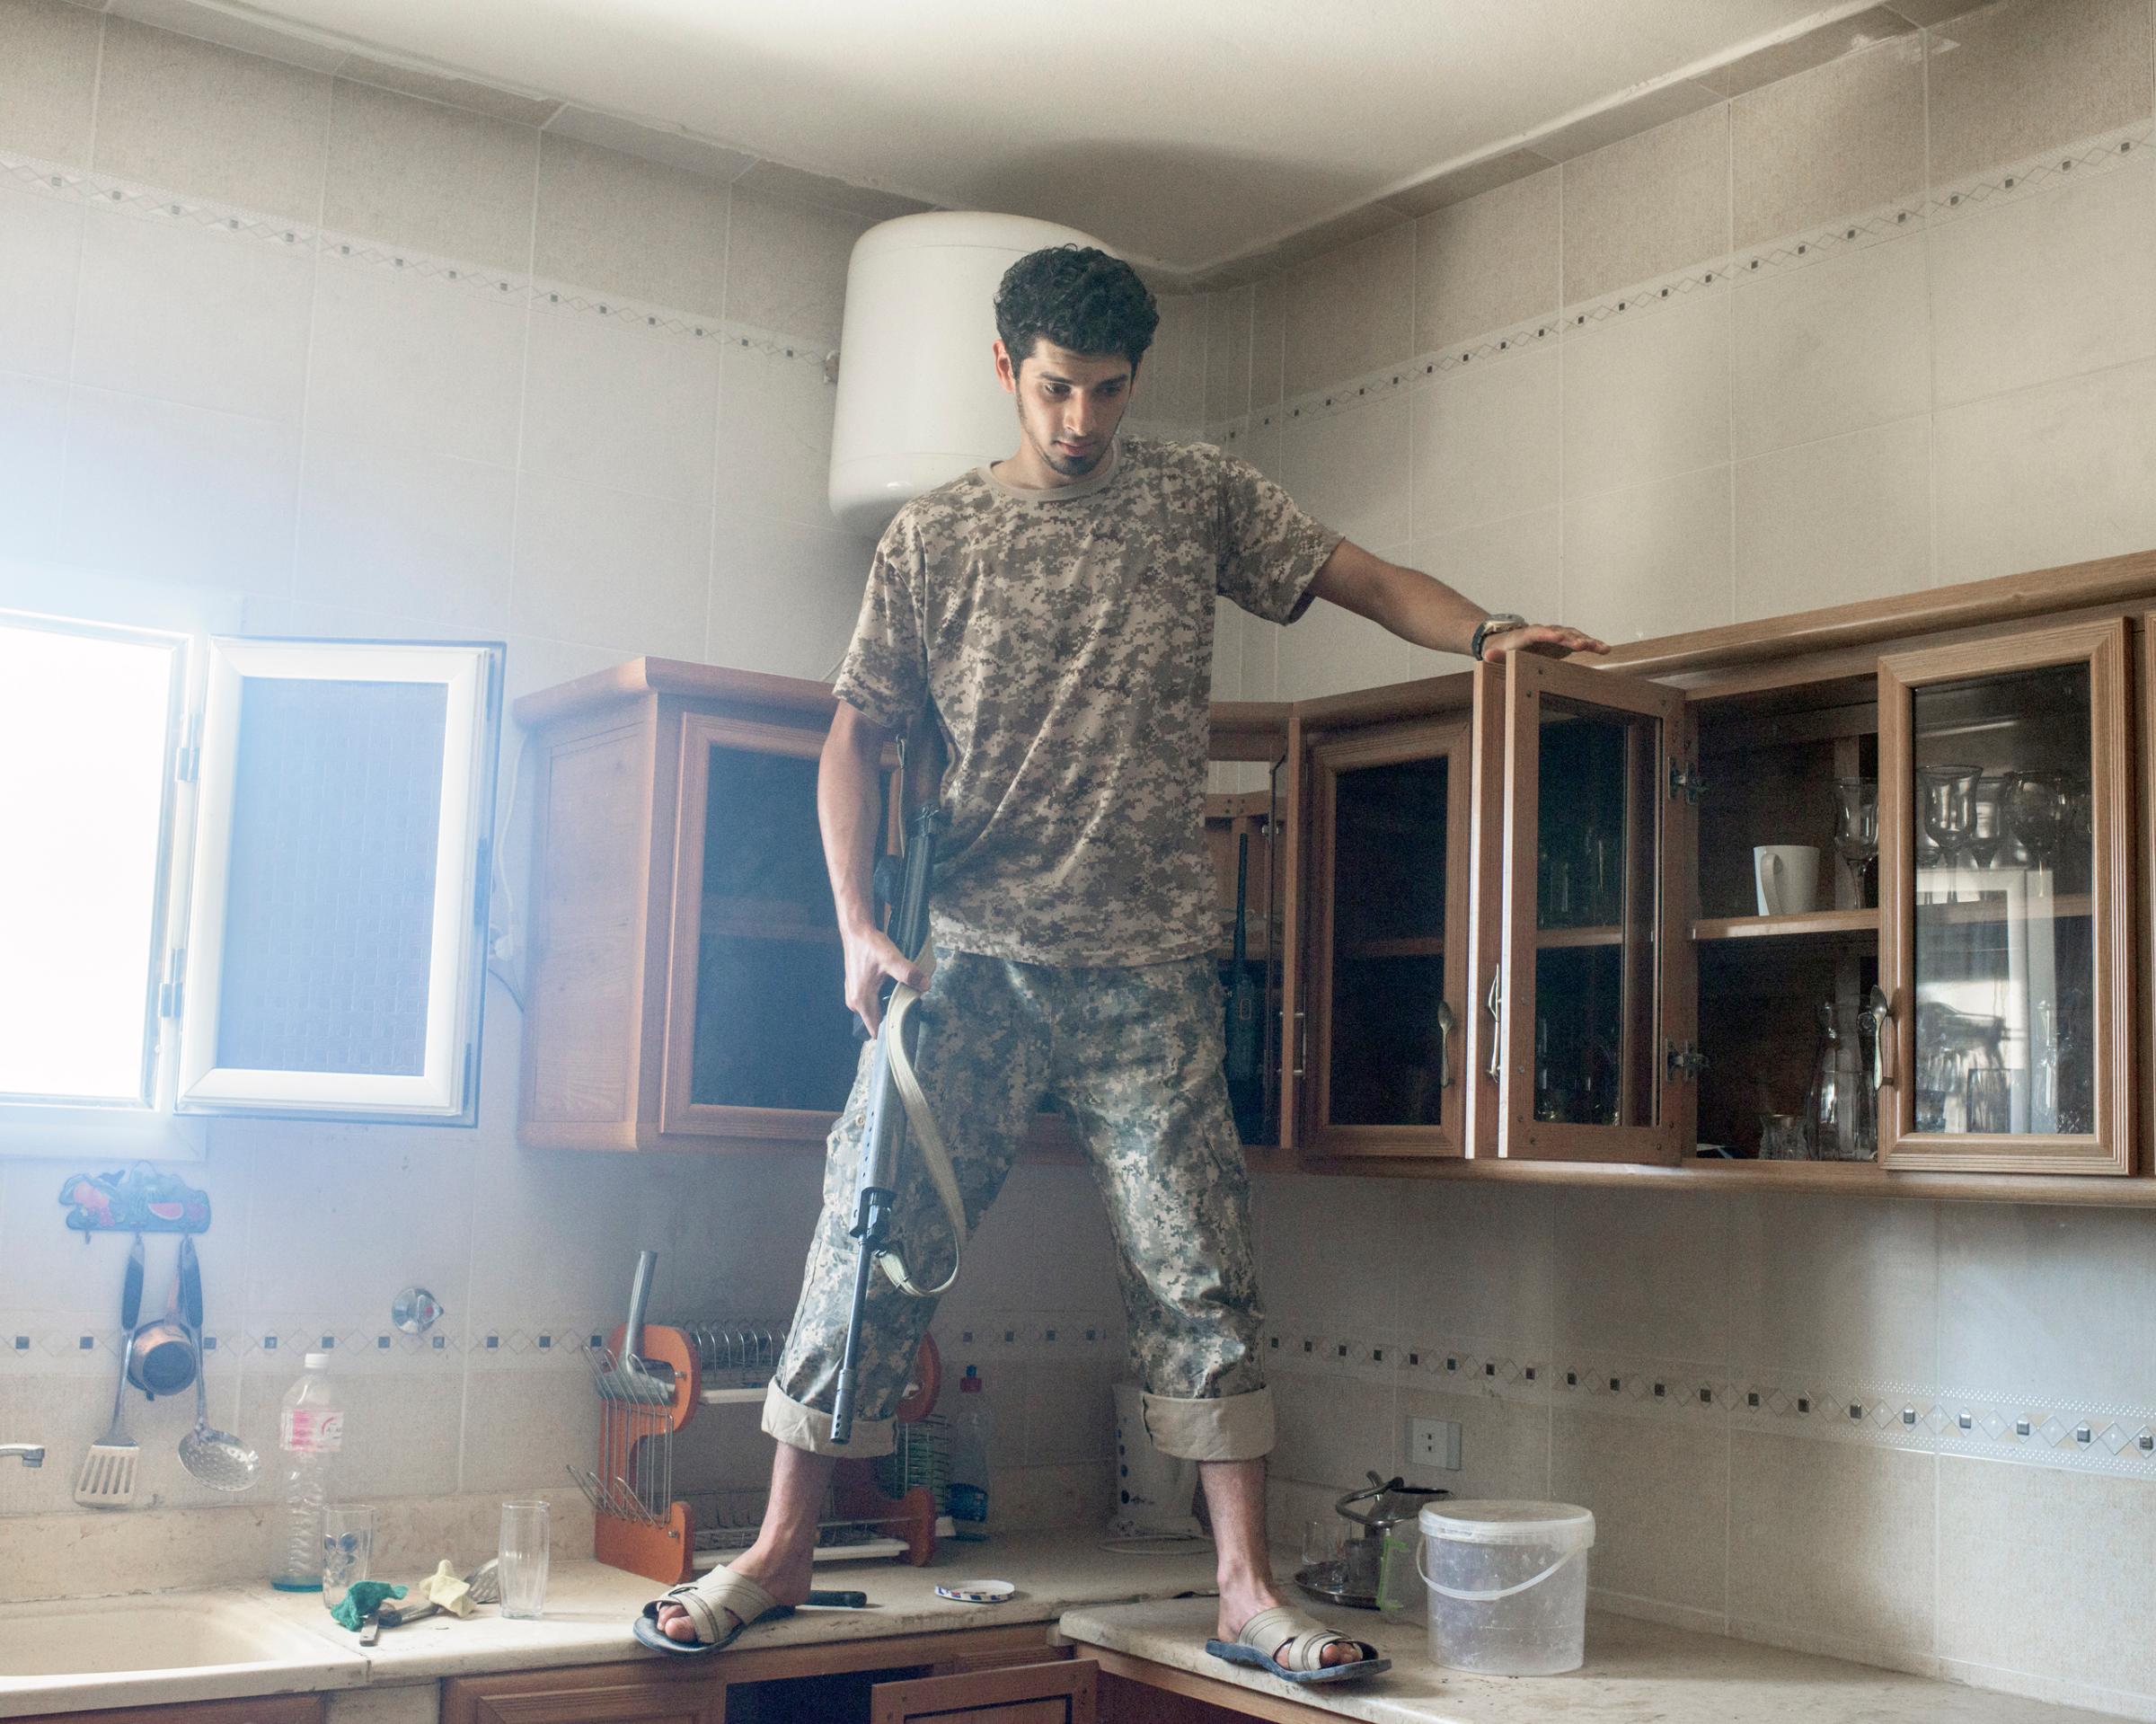 A Libyan fighter checks a kitchen for IEDs in a villa in a newly-liberated district, Sirt, Libya, July 2016.